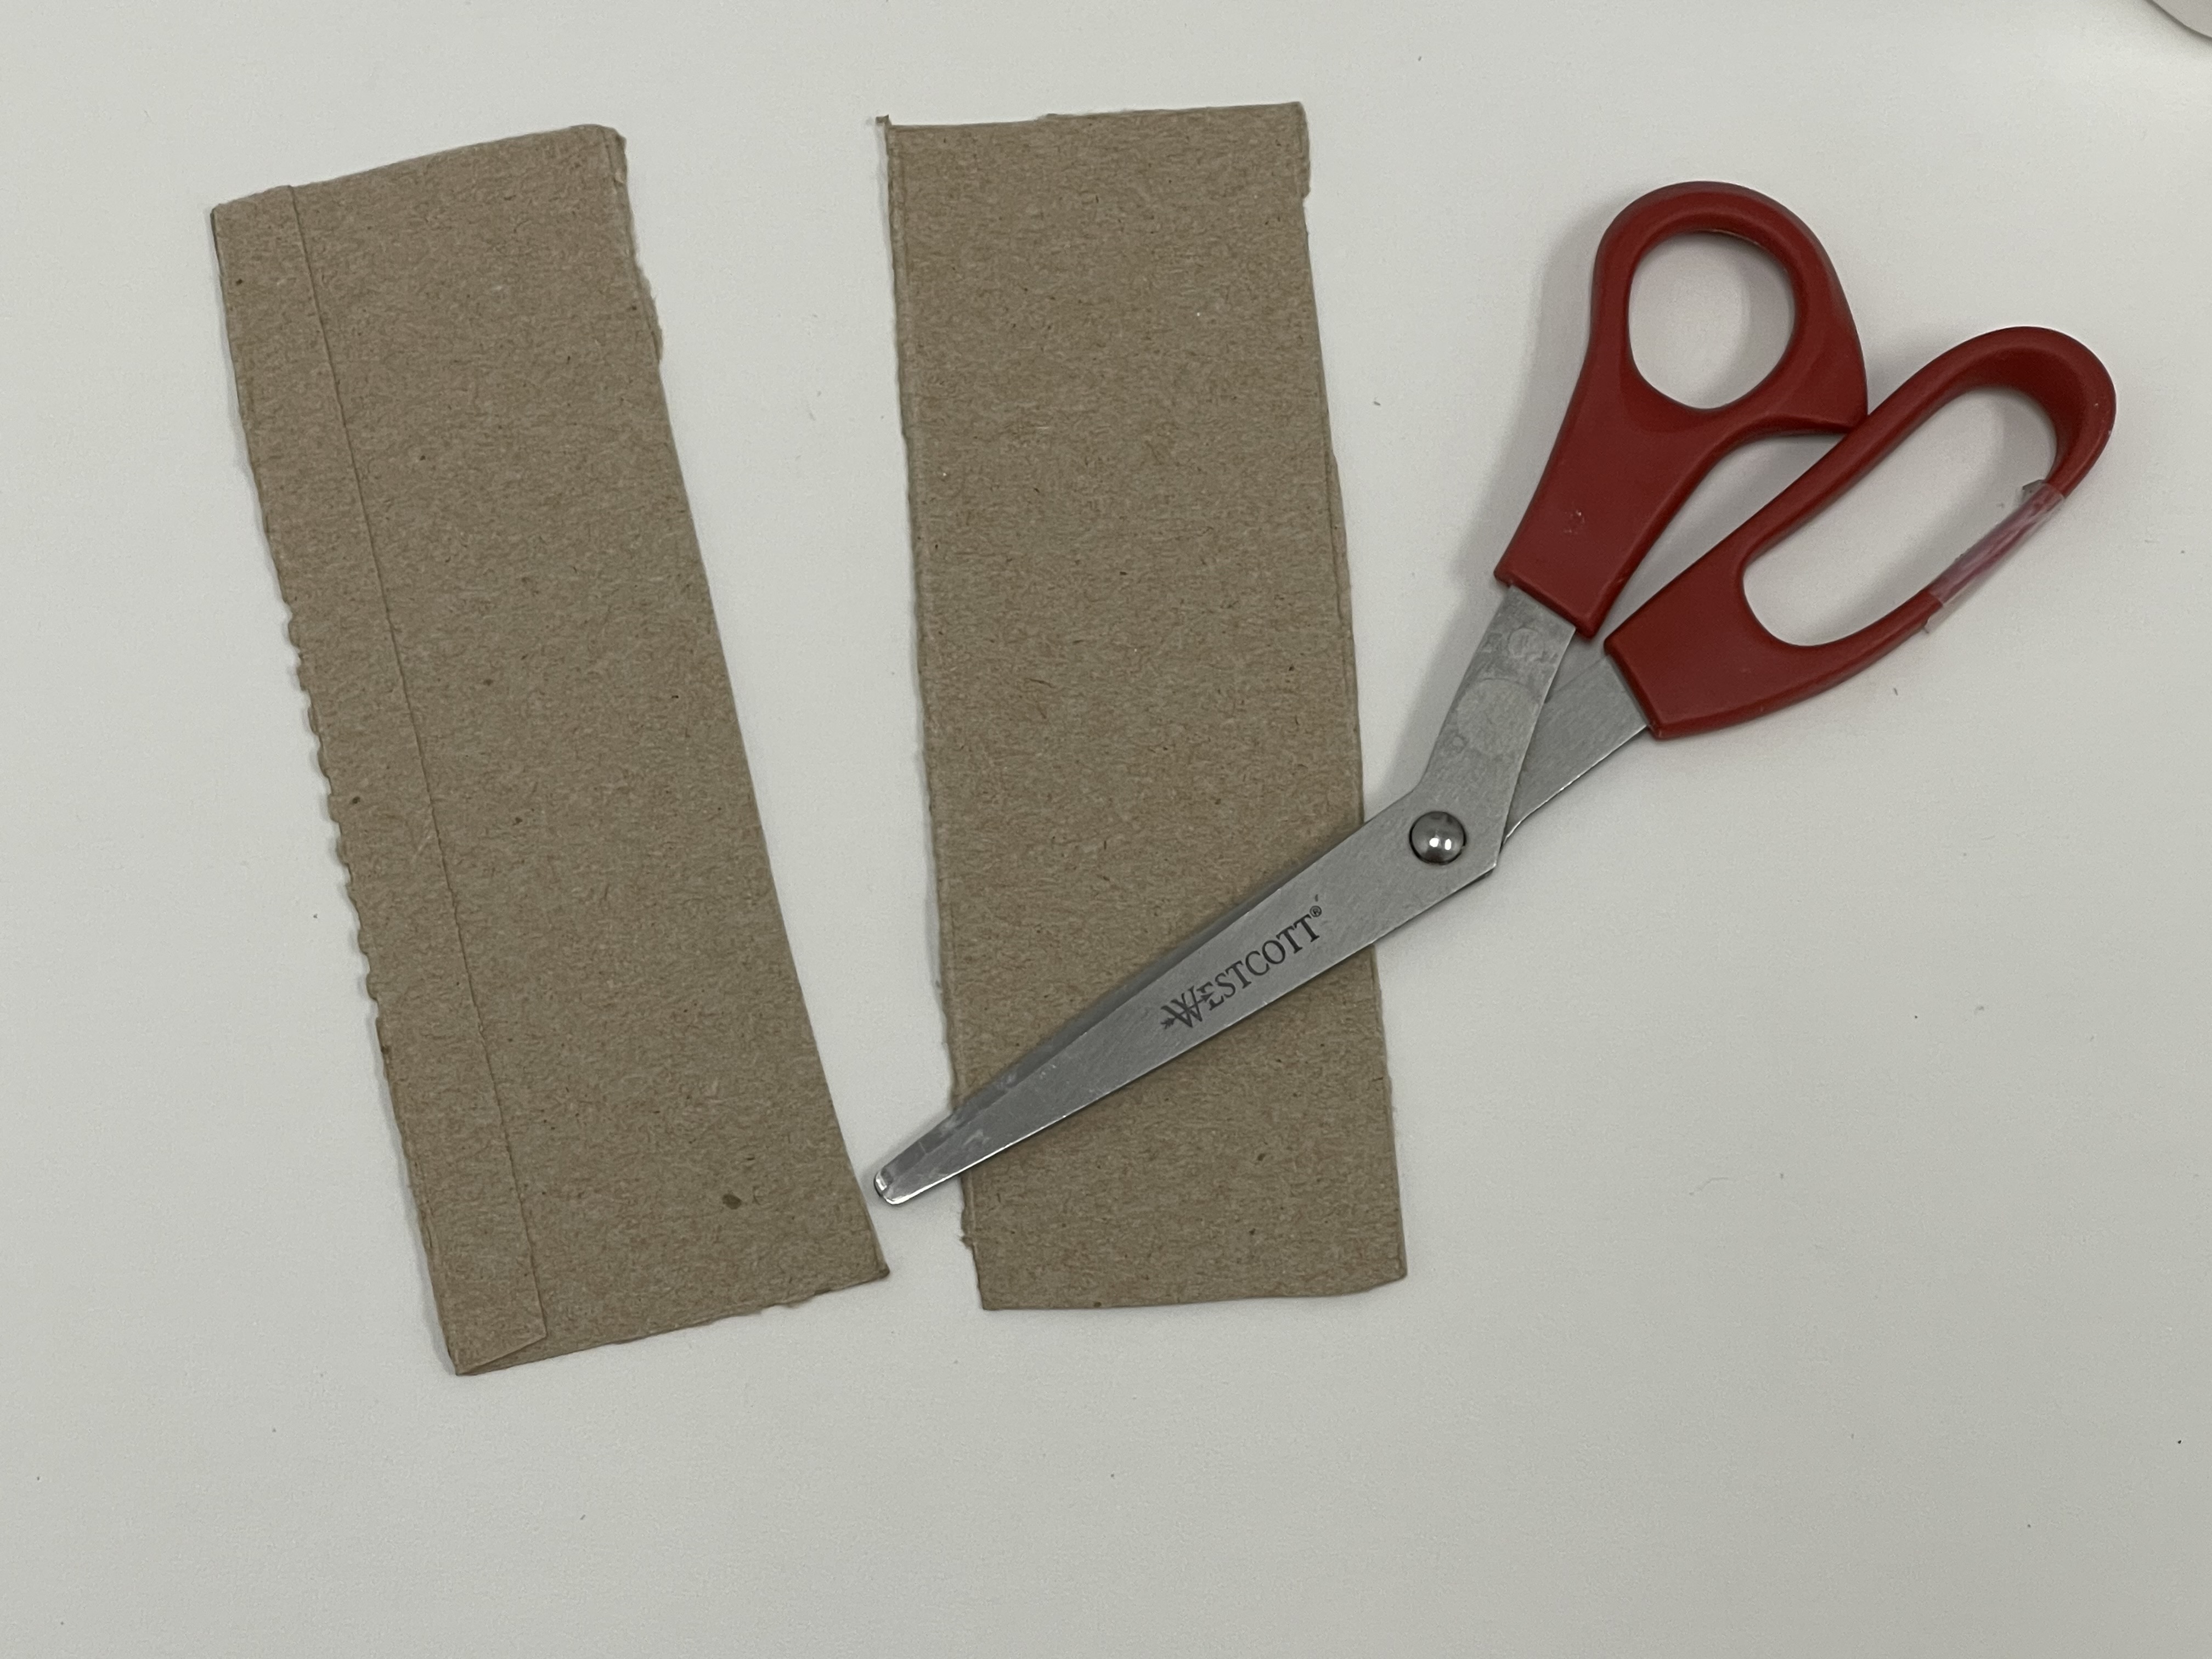 red handle scissors and two cardboard pieces